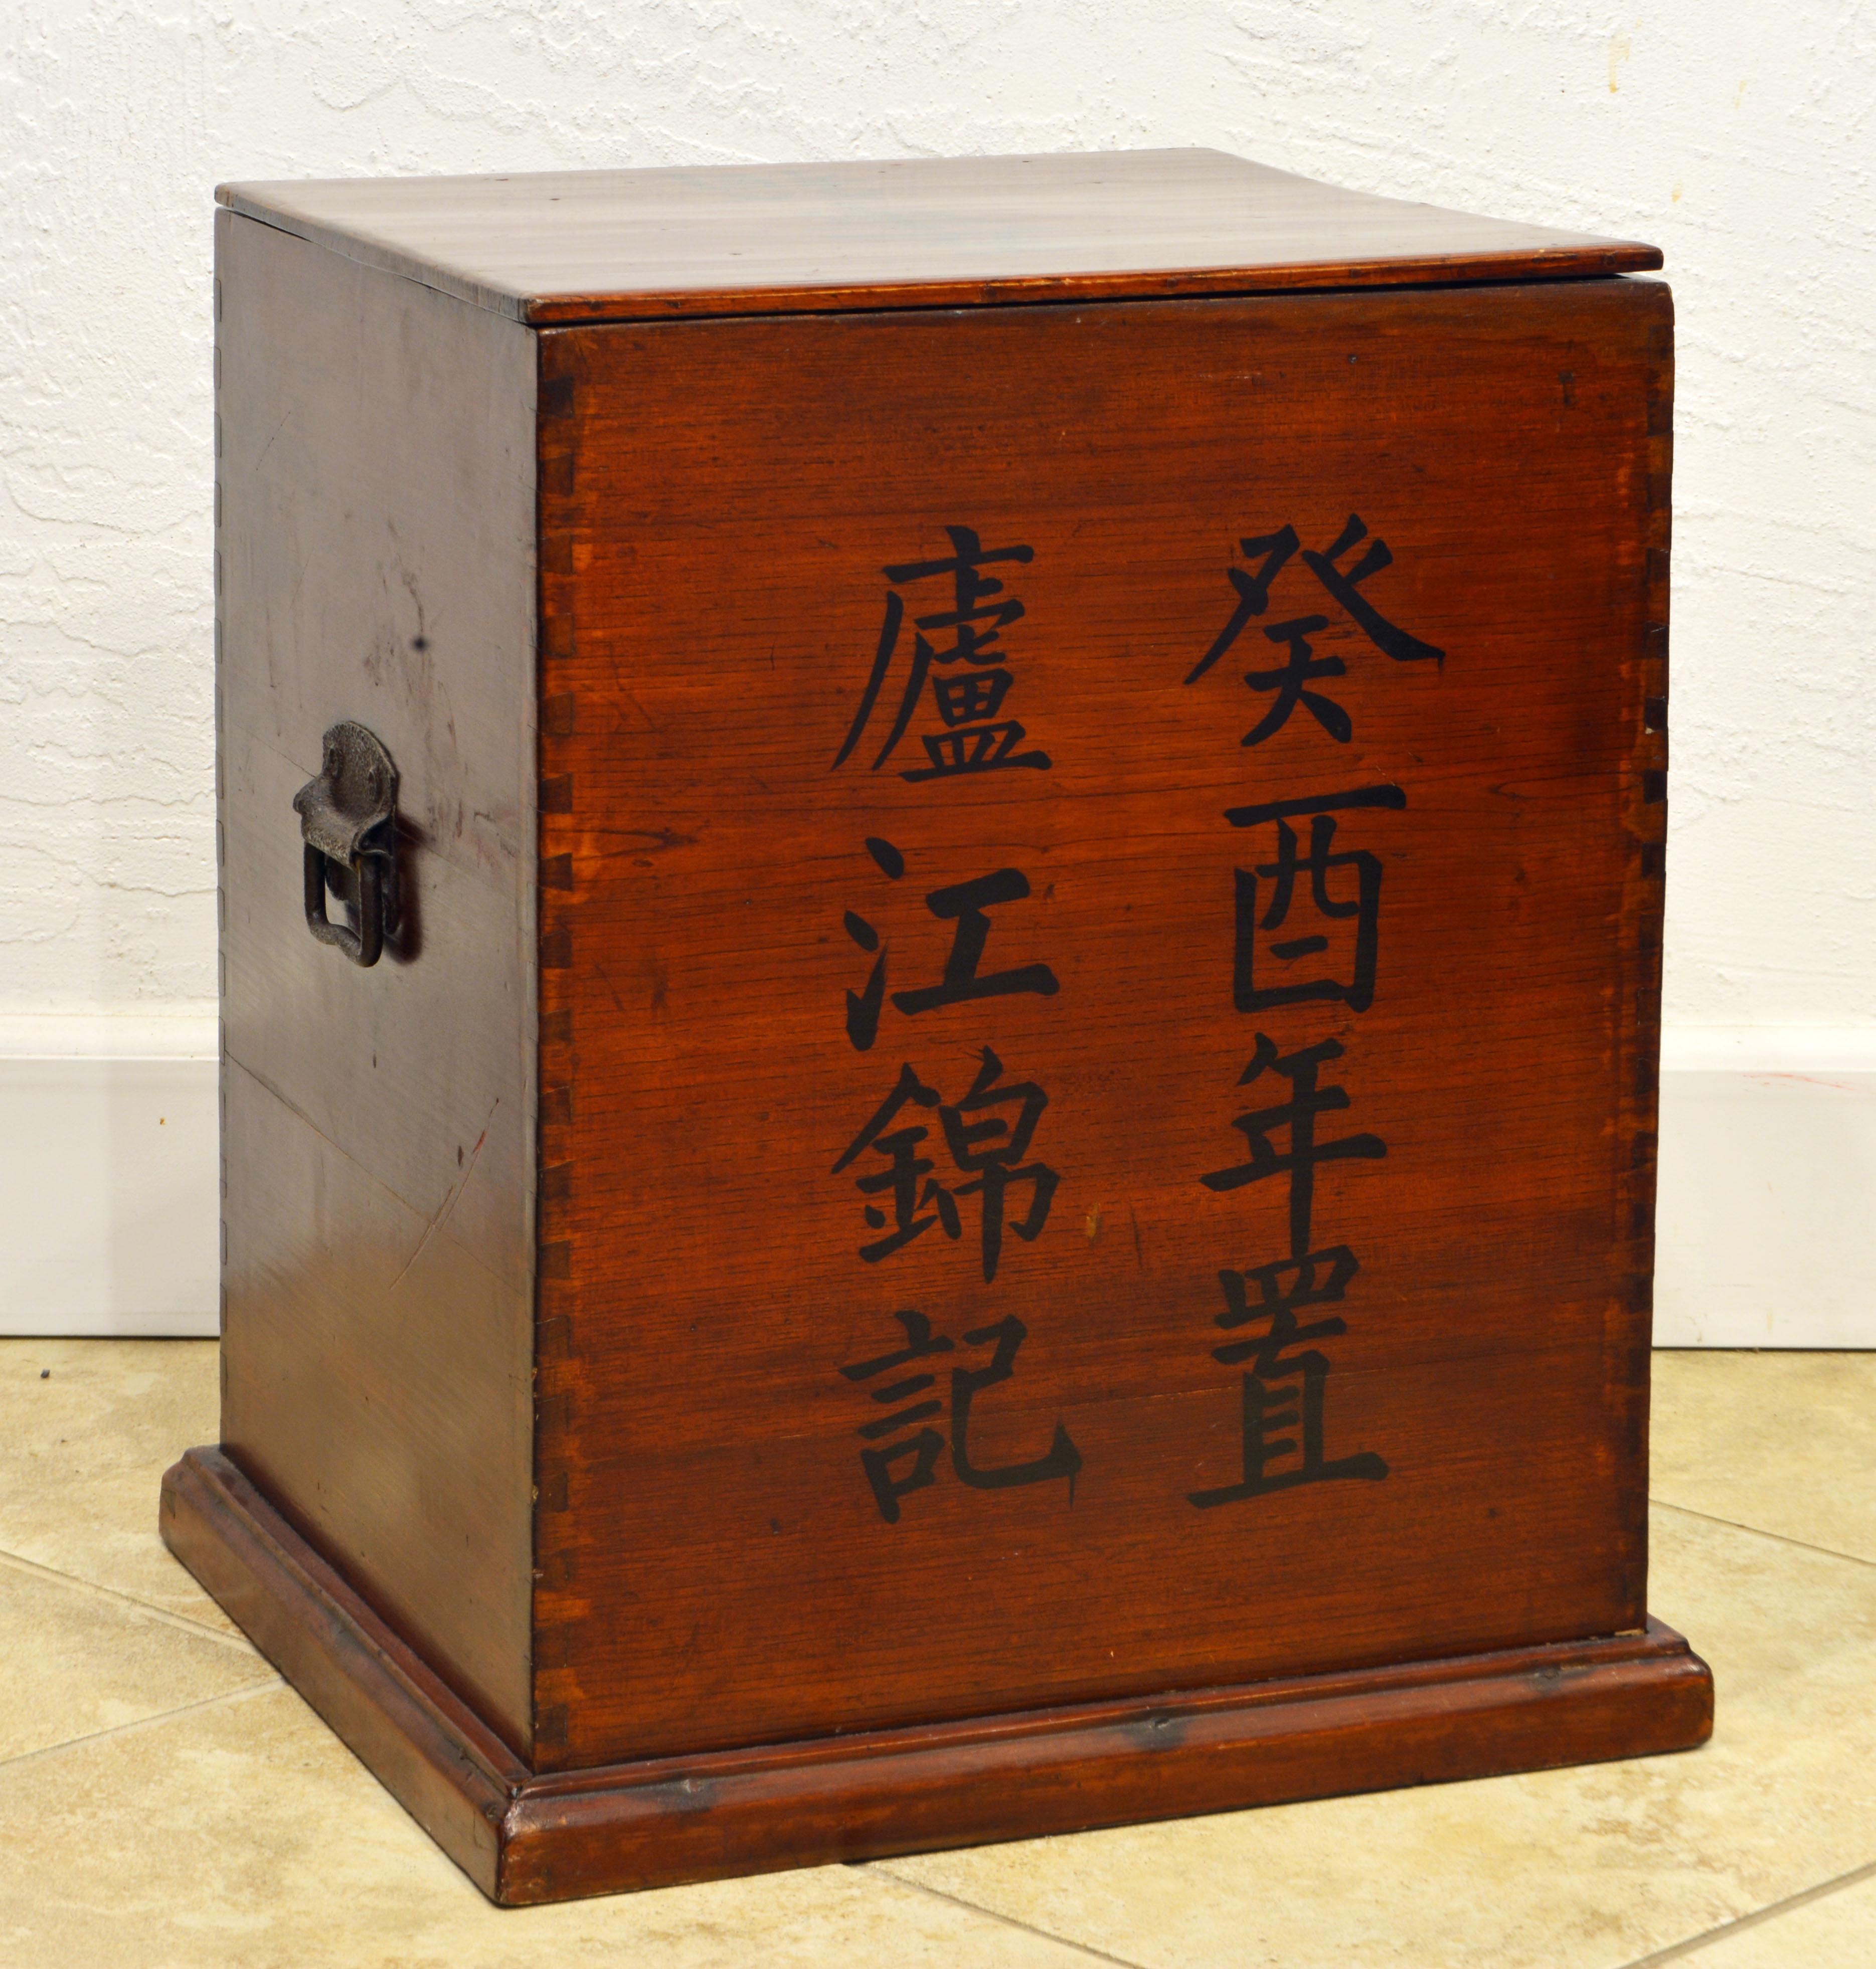 This early 20th century Japanese merchant's or storage box can serve as a sophisticated side table. It has been restored to its original luster. Top and front are beautifully inscribed with Japanese letters. The top opens with a slide and push